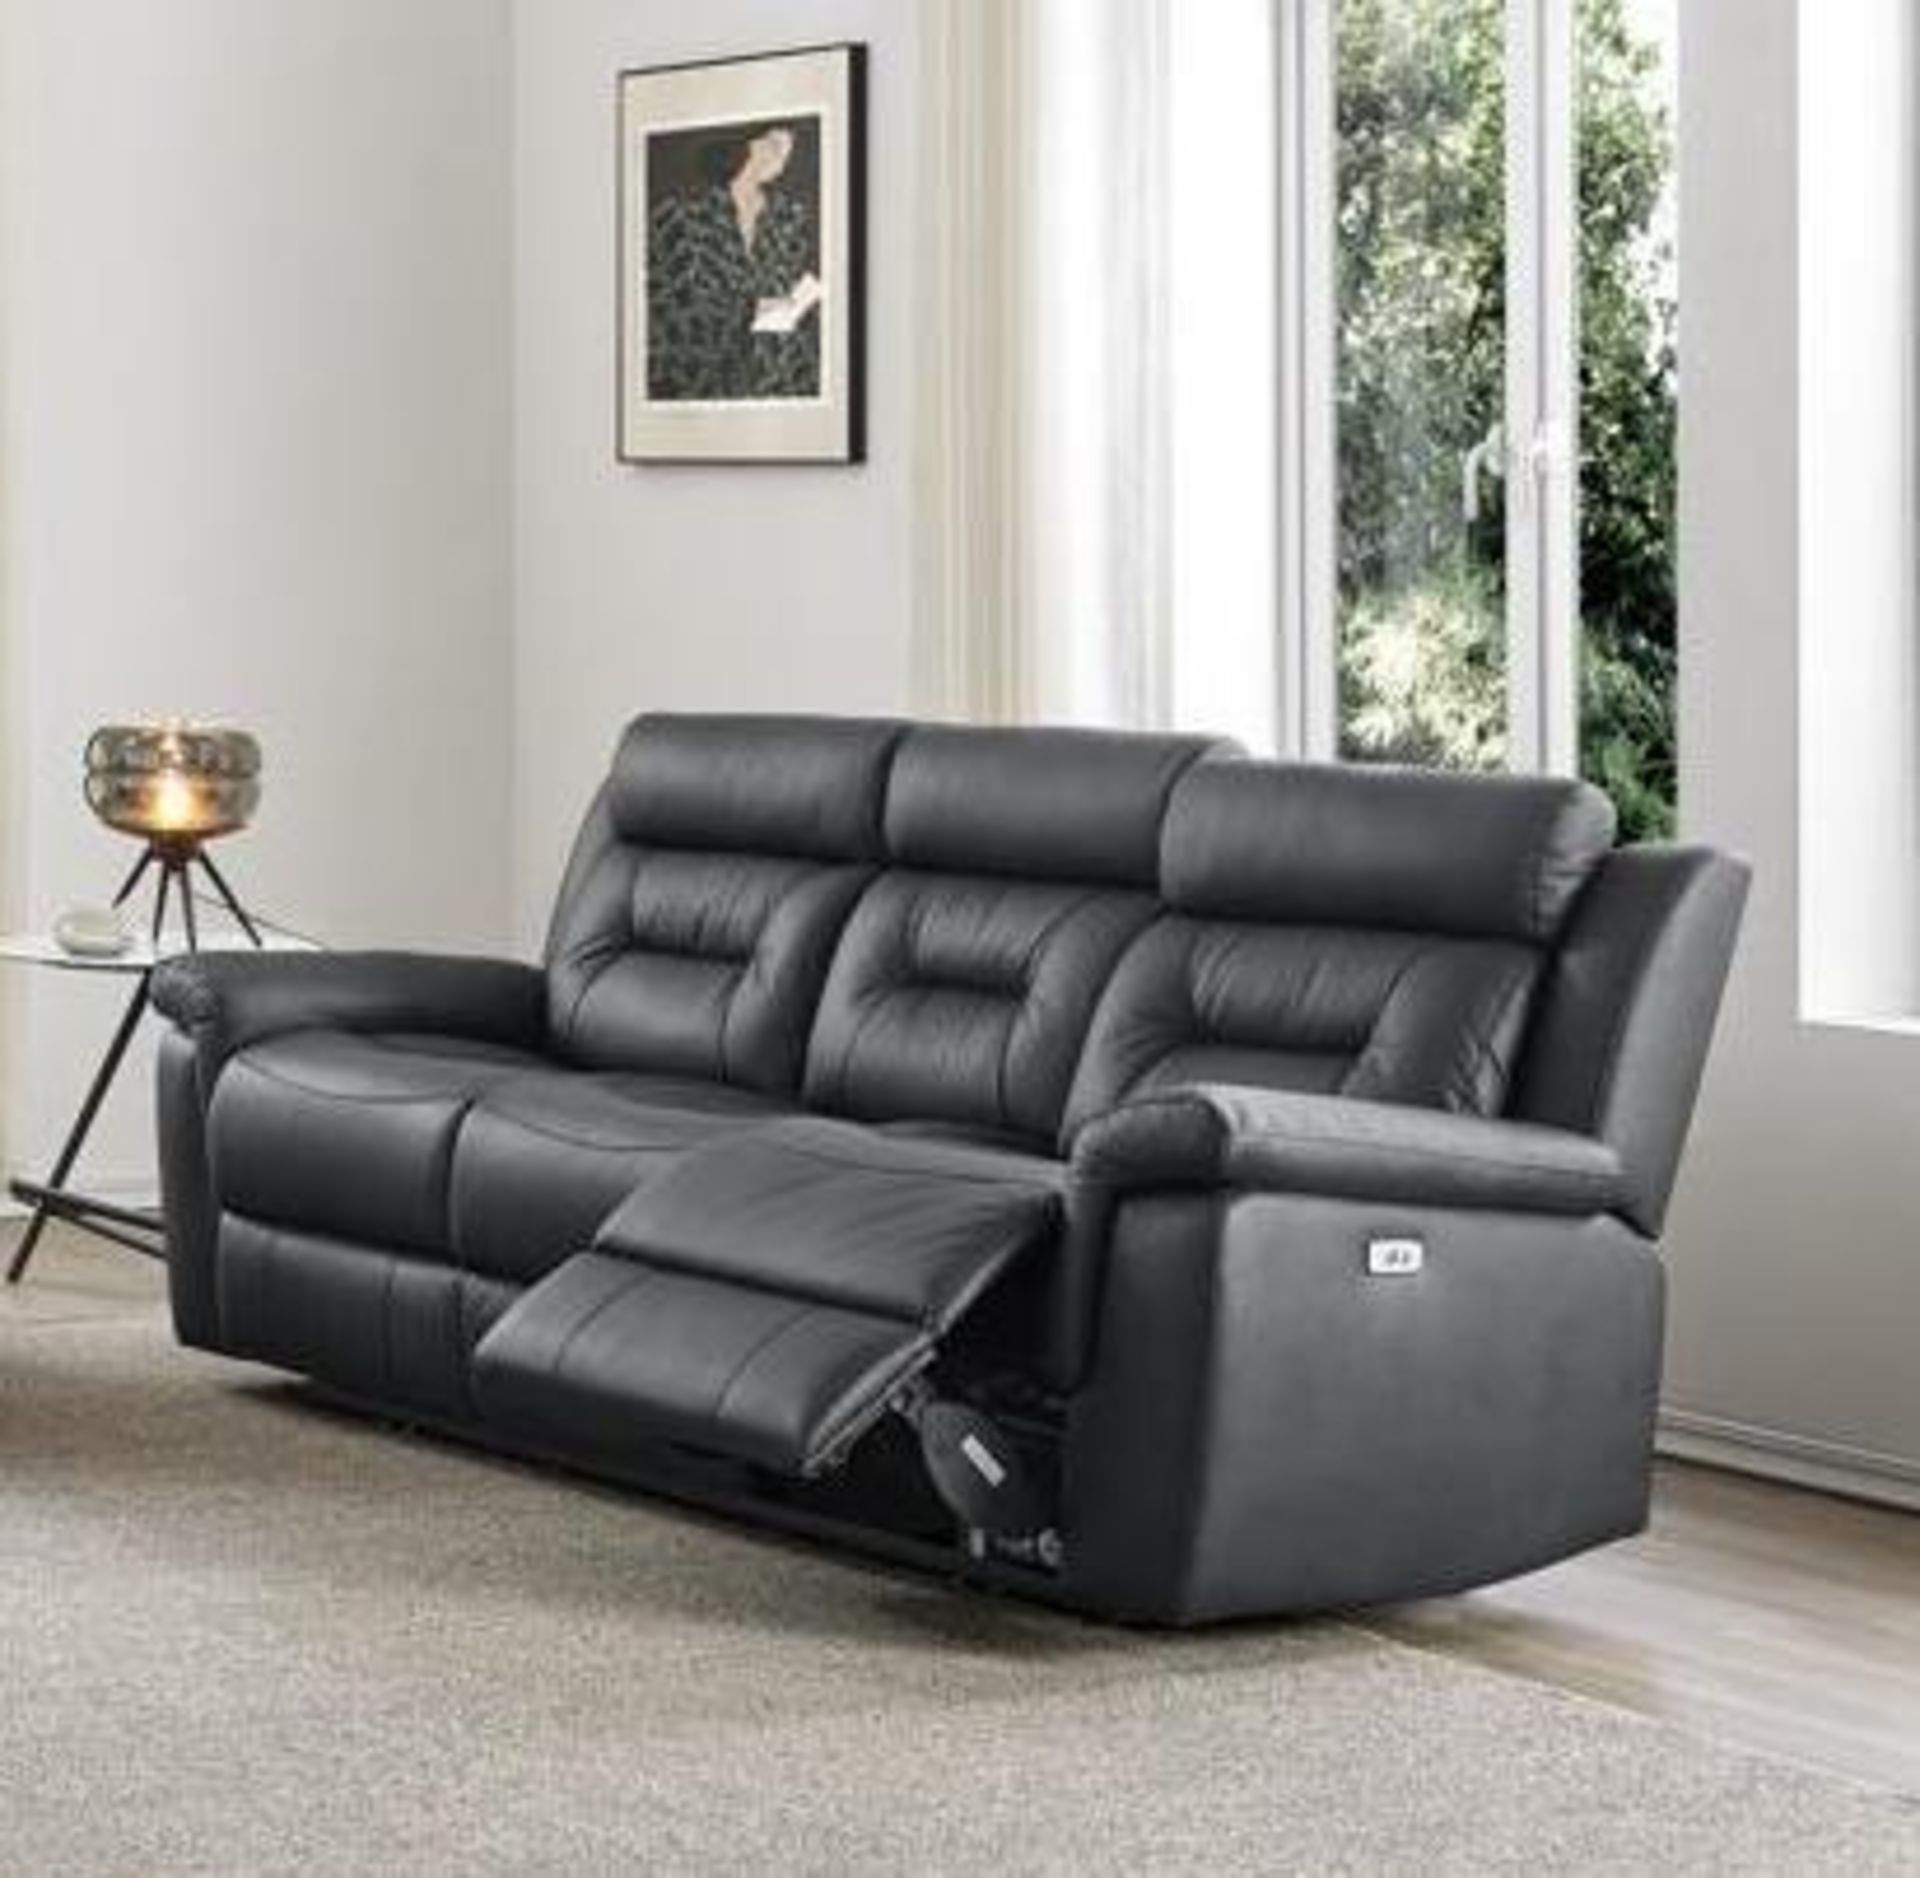 *BRAND NEW* Milano Leather Electric Recliner Collection 3 Seater in Black.